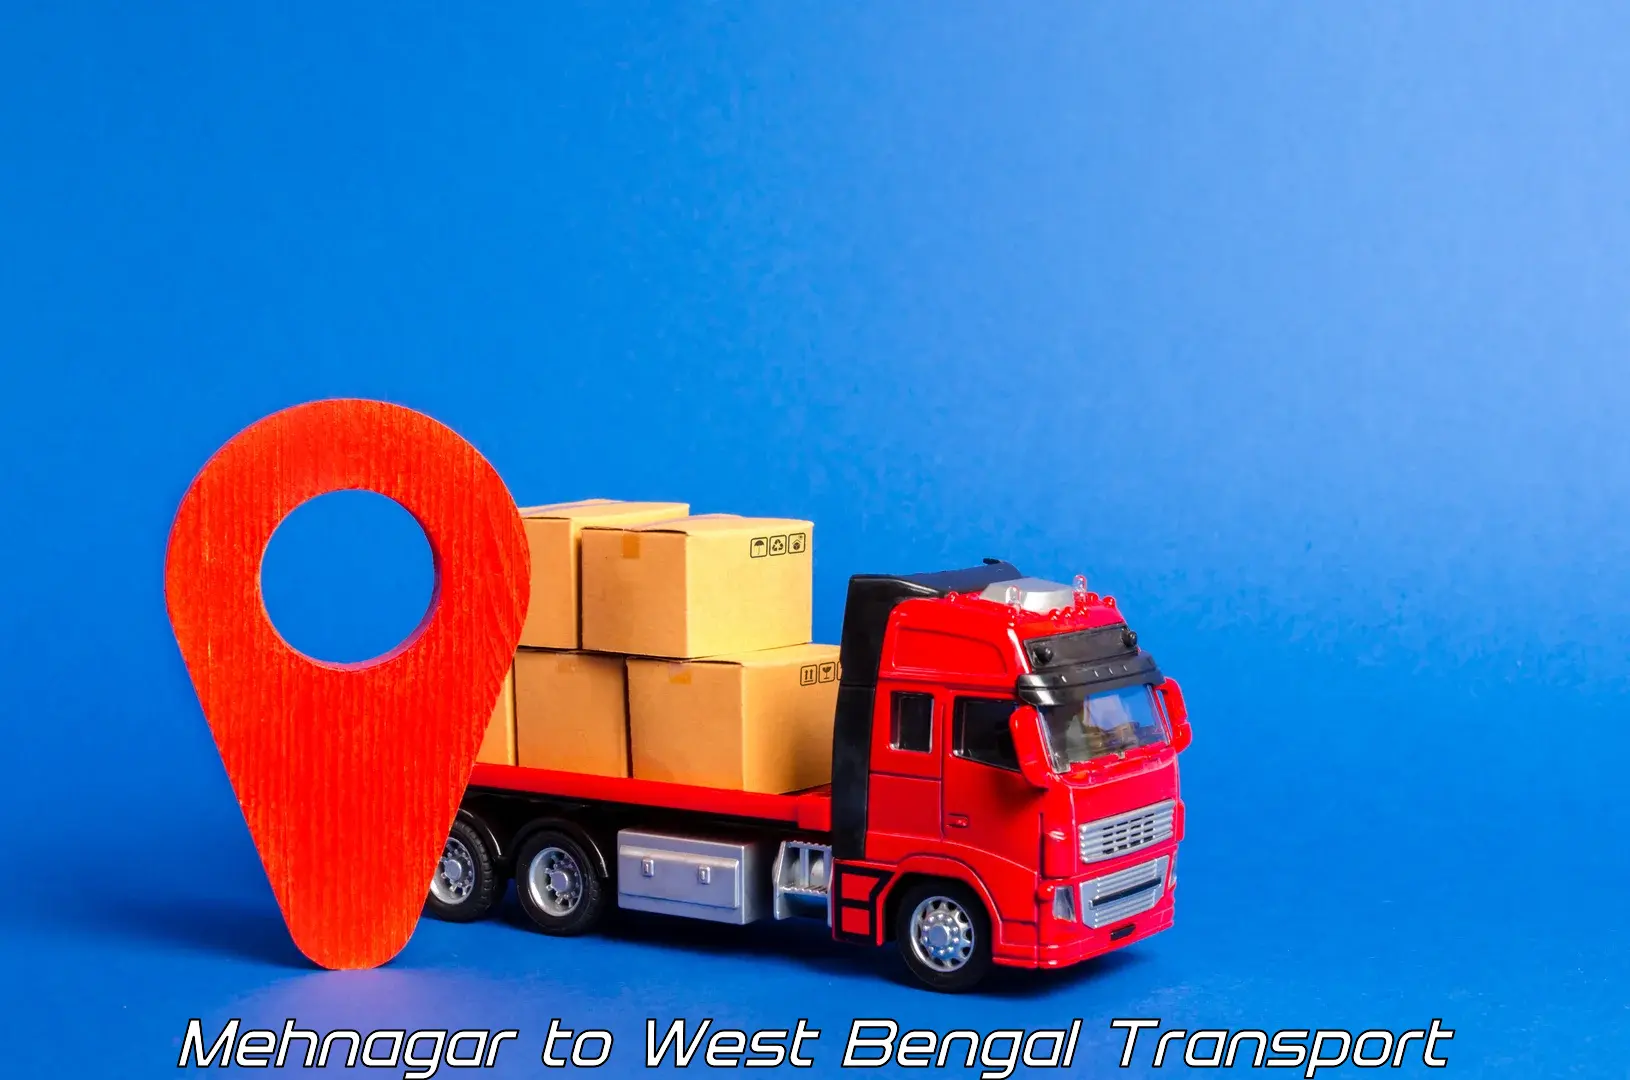 Daily parcel service transport Mehnagar to Budge Budge